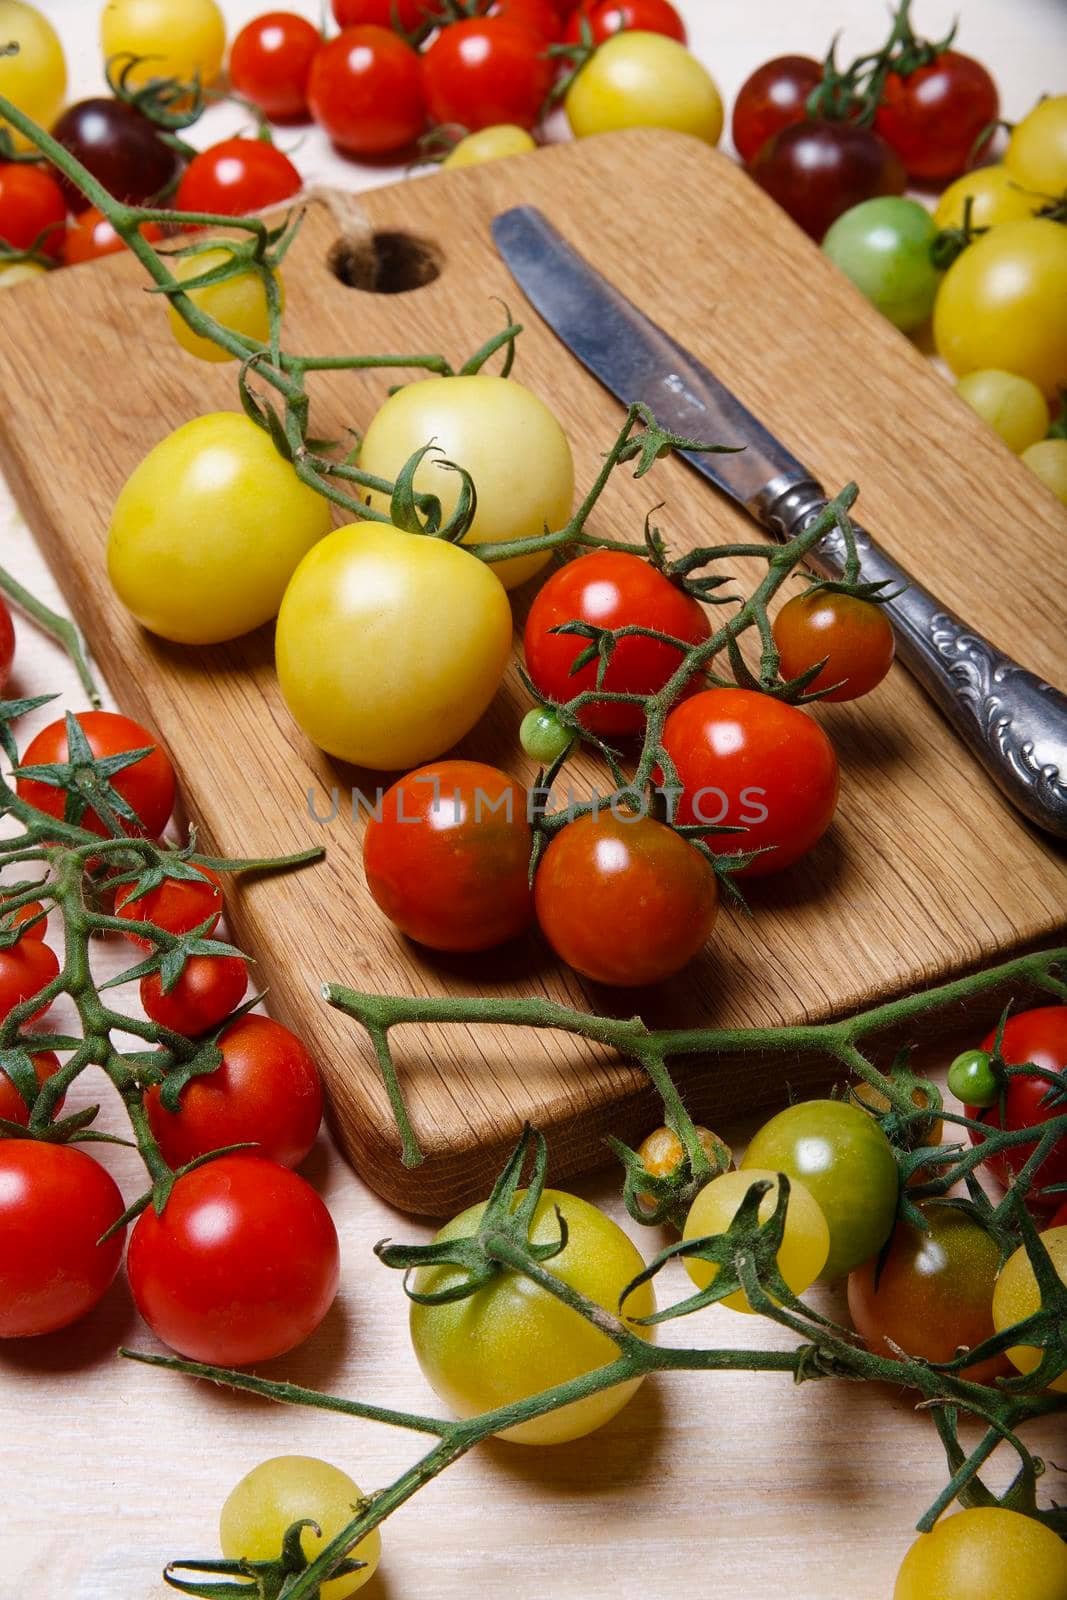 Little red, yellow, green and black cherry tomatoes on white table with wooden cutting board, nature background. by Vera_FoodandGarden